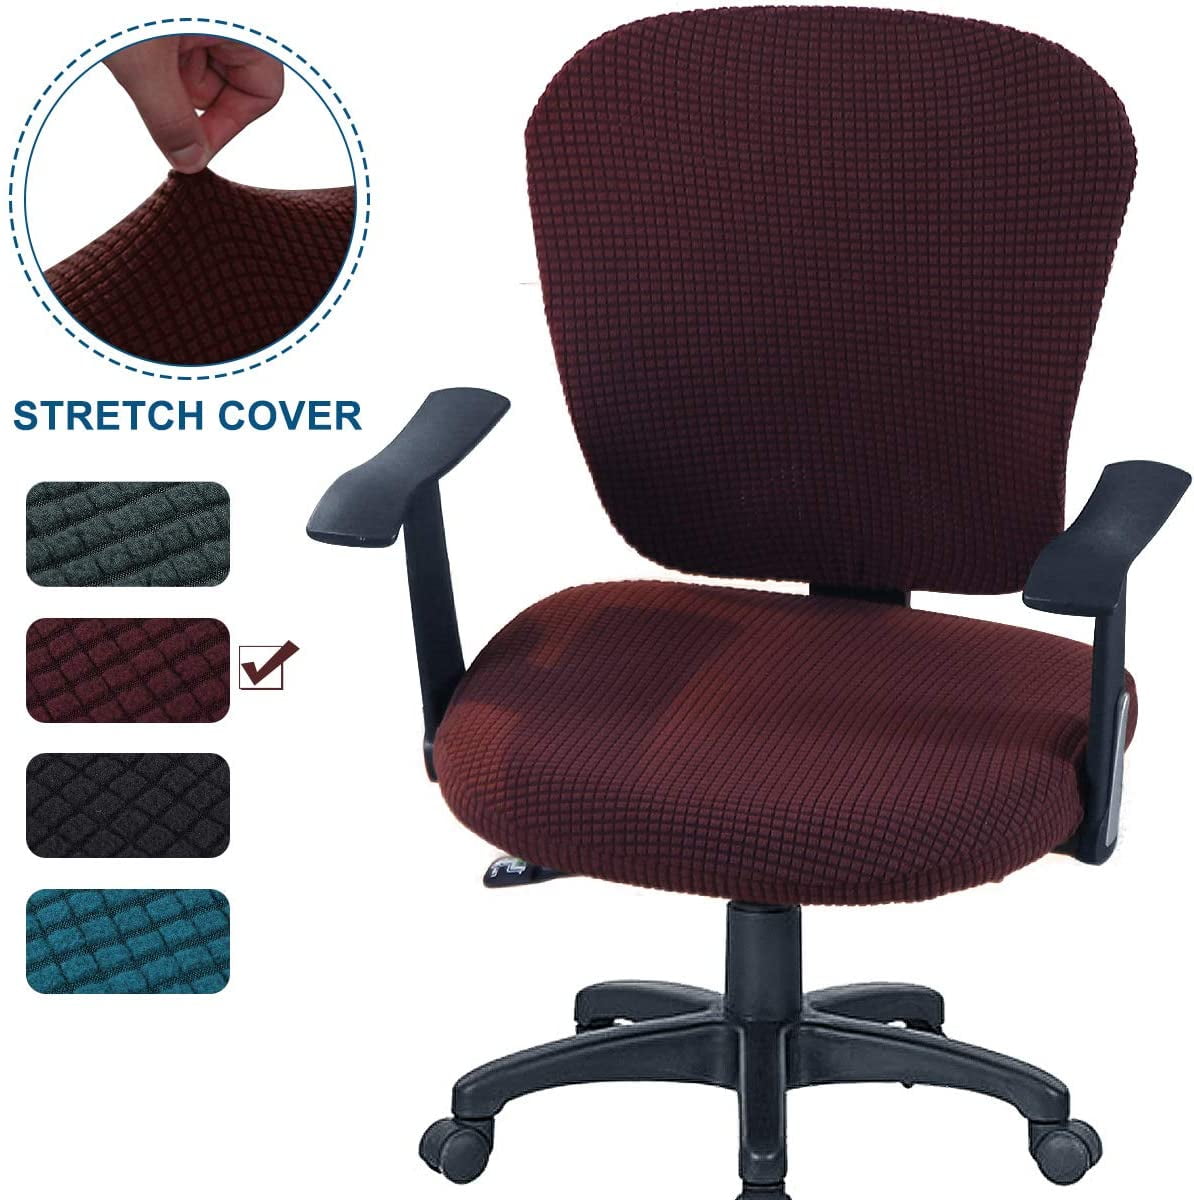 Stretch Universal Office Computer Chair Slipcover Desk Task Rotat Seat Cover UK 